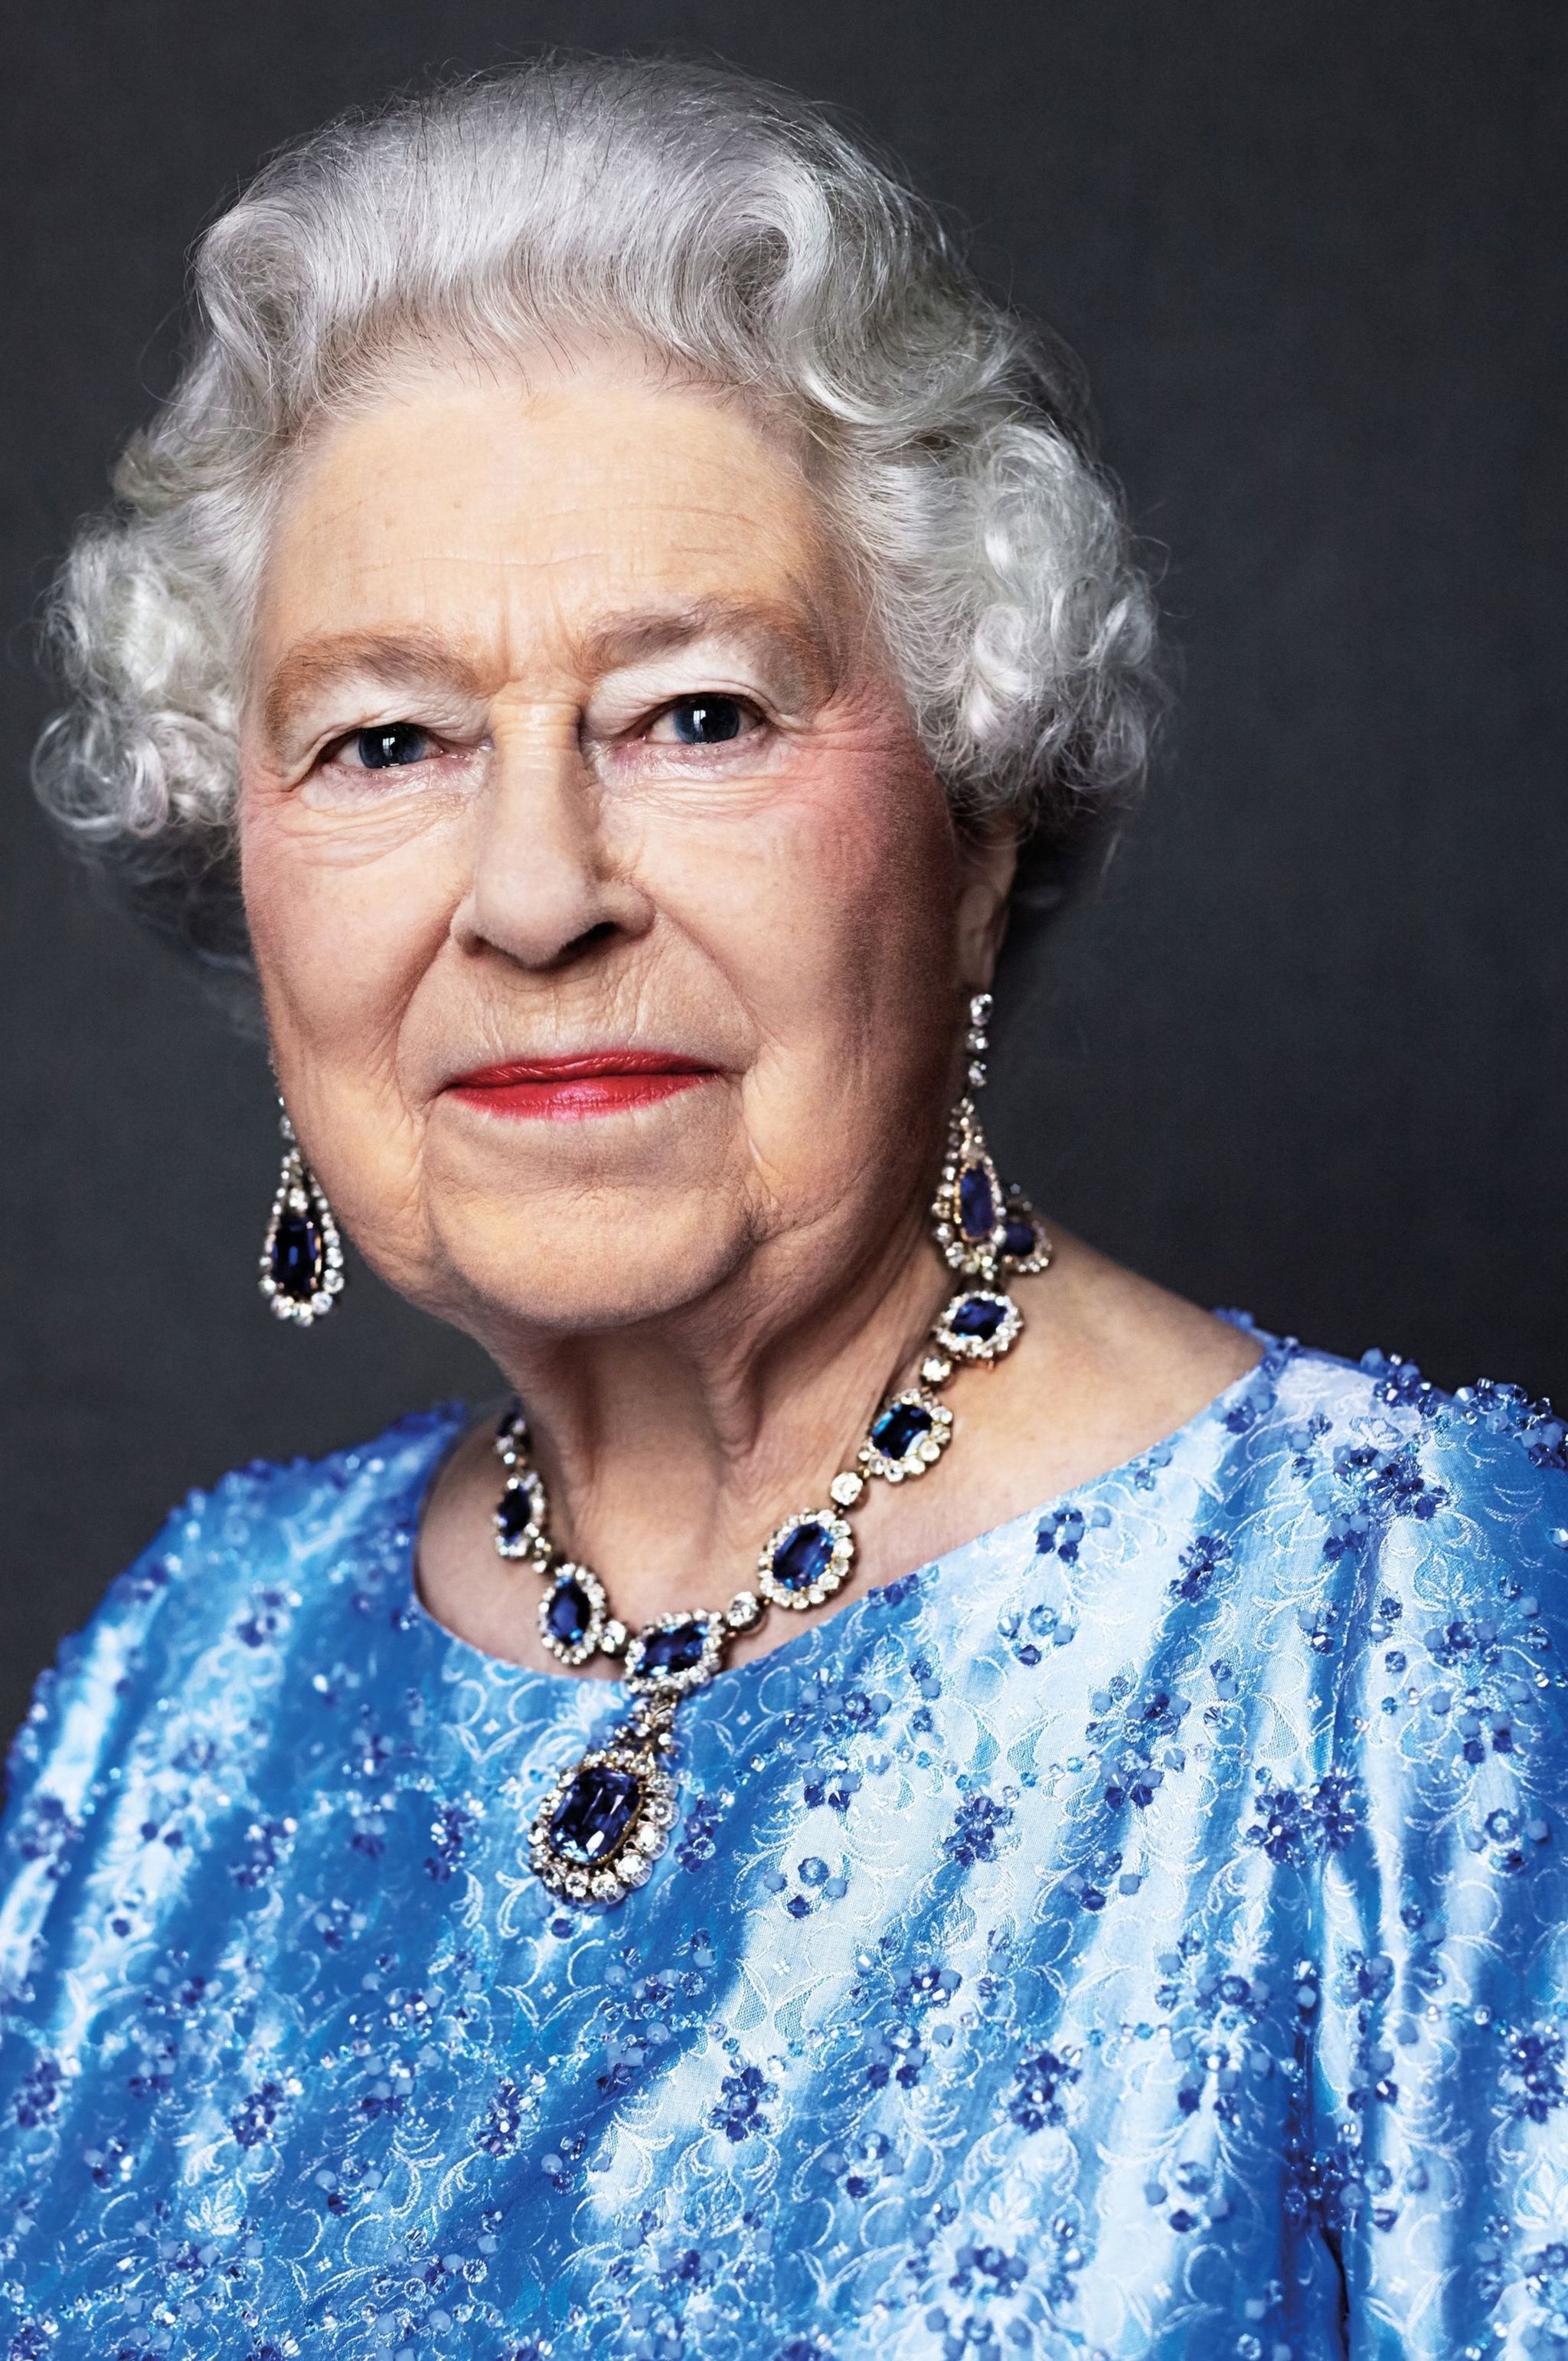 Portrait of the Queen by David Bailey